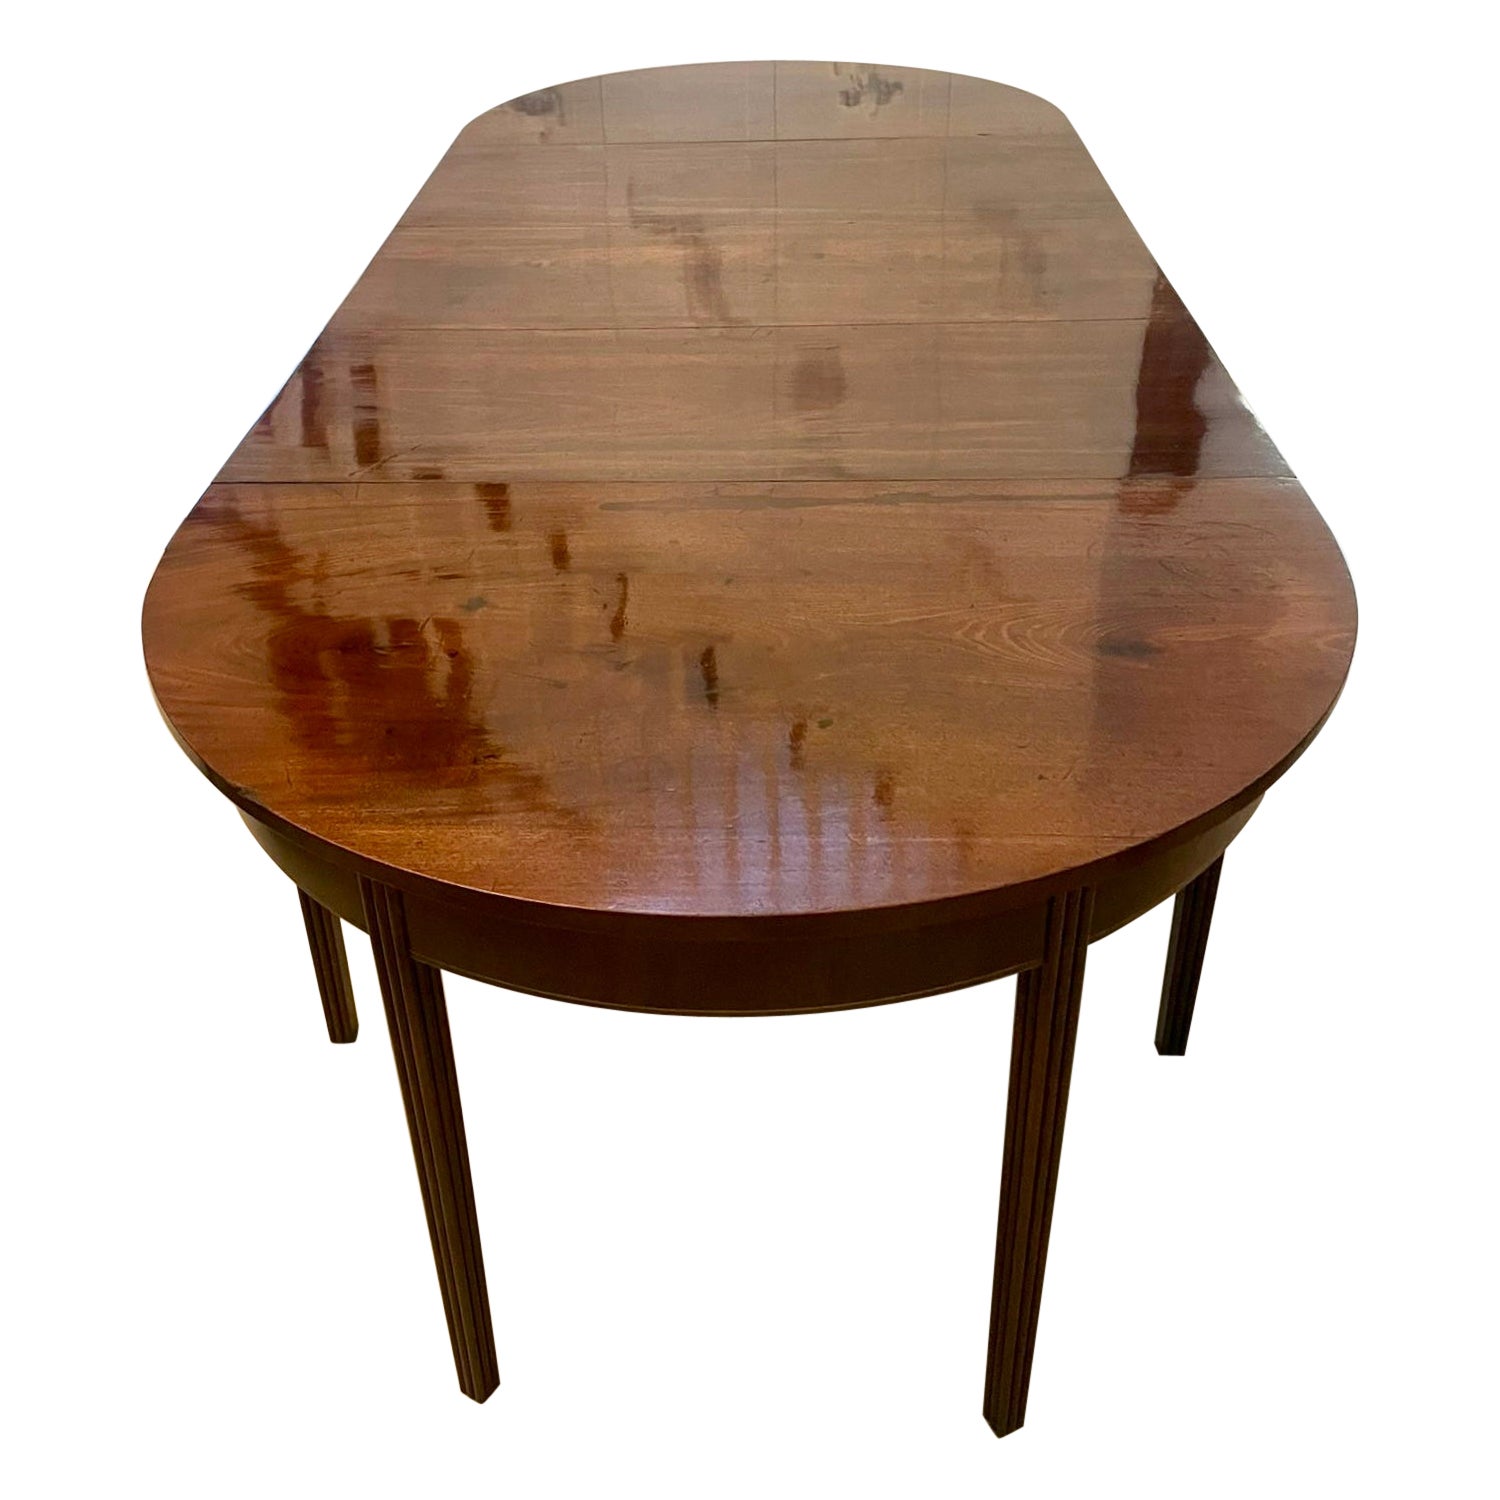 Outstanding Quality Antique George III Figured Mahogany Metamorphic Dining Table For Sale